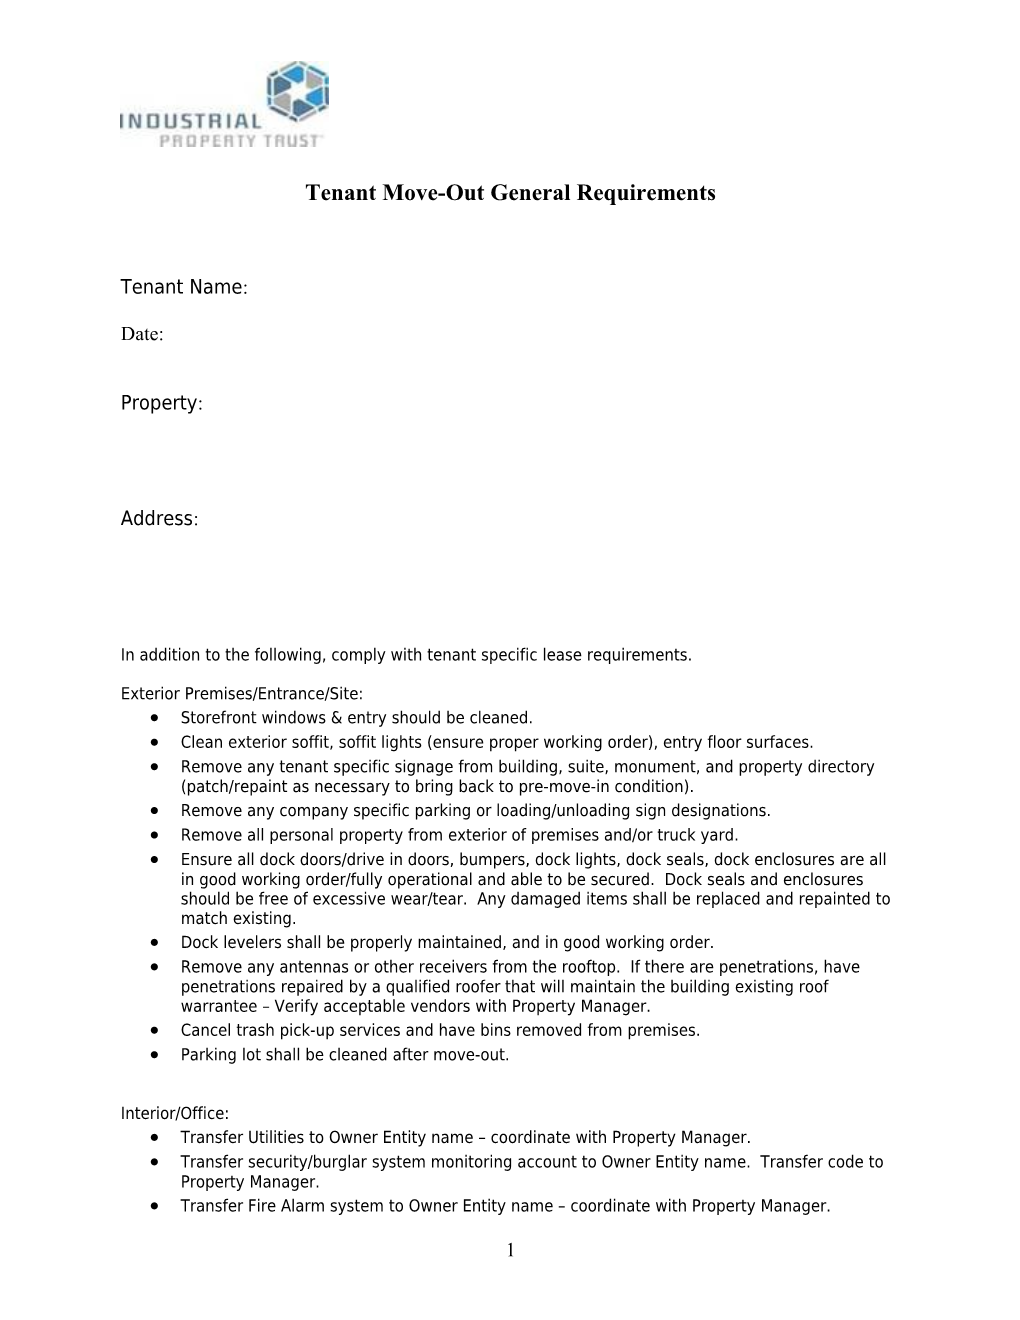 Tenant Move-Out General Requirements